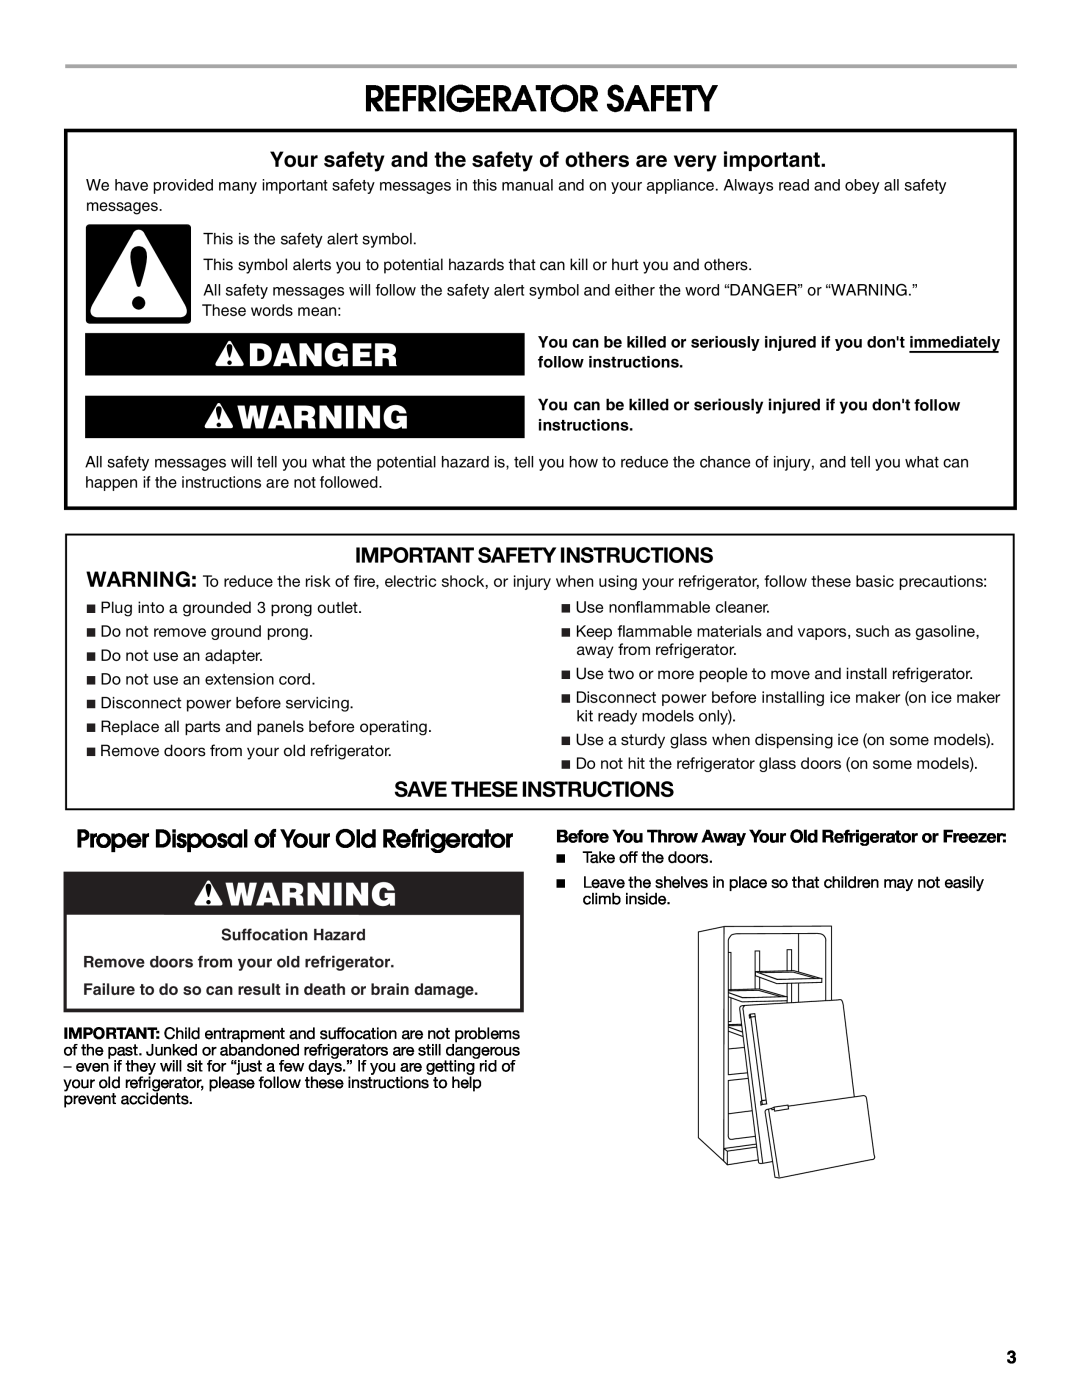 Jenn-Air W10231365B Refrigerator Safety, Danger, Proper Disposal of Your Old Refrigerator, Important Safety Instructions 